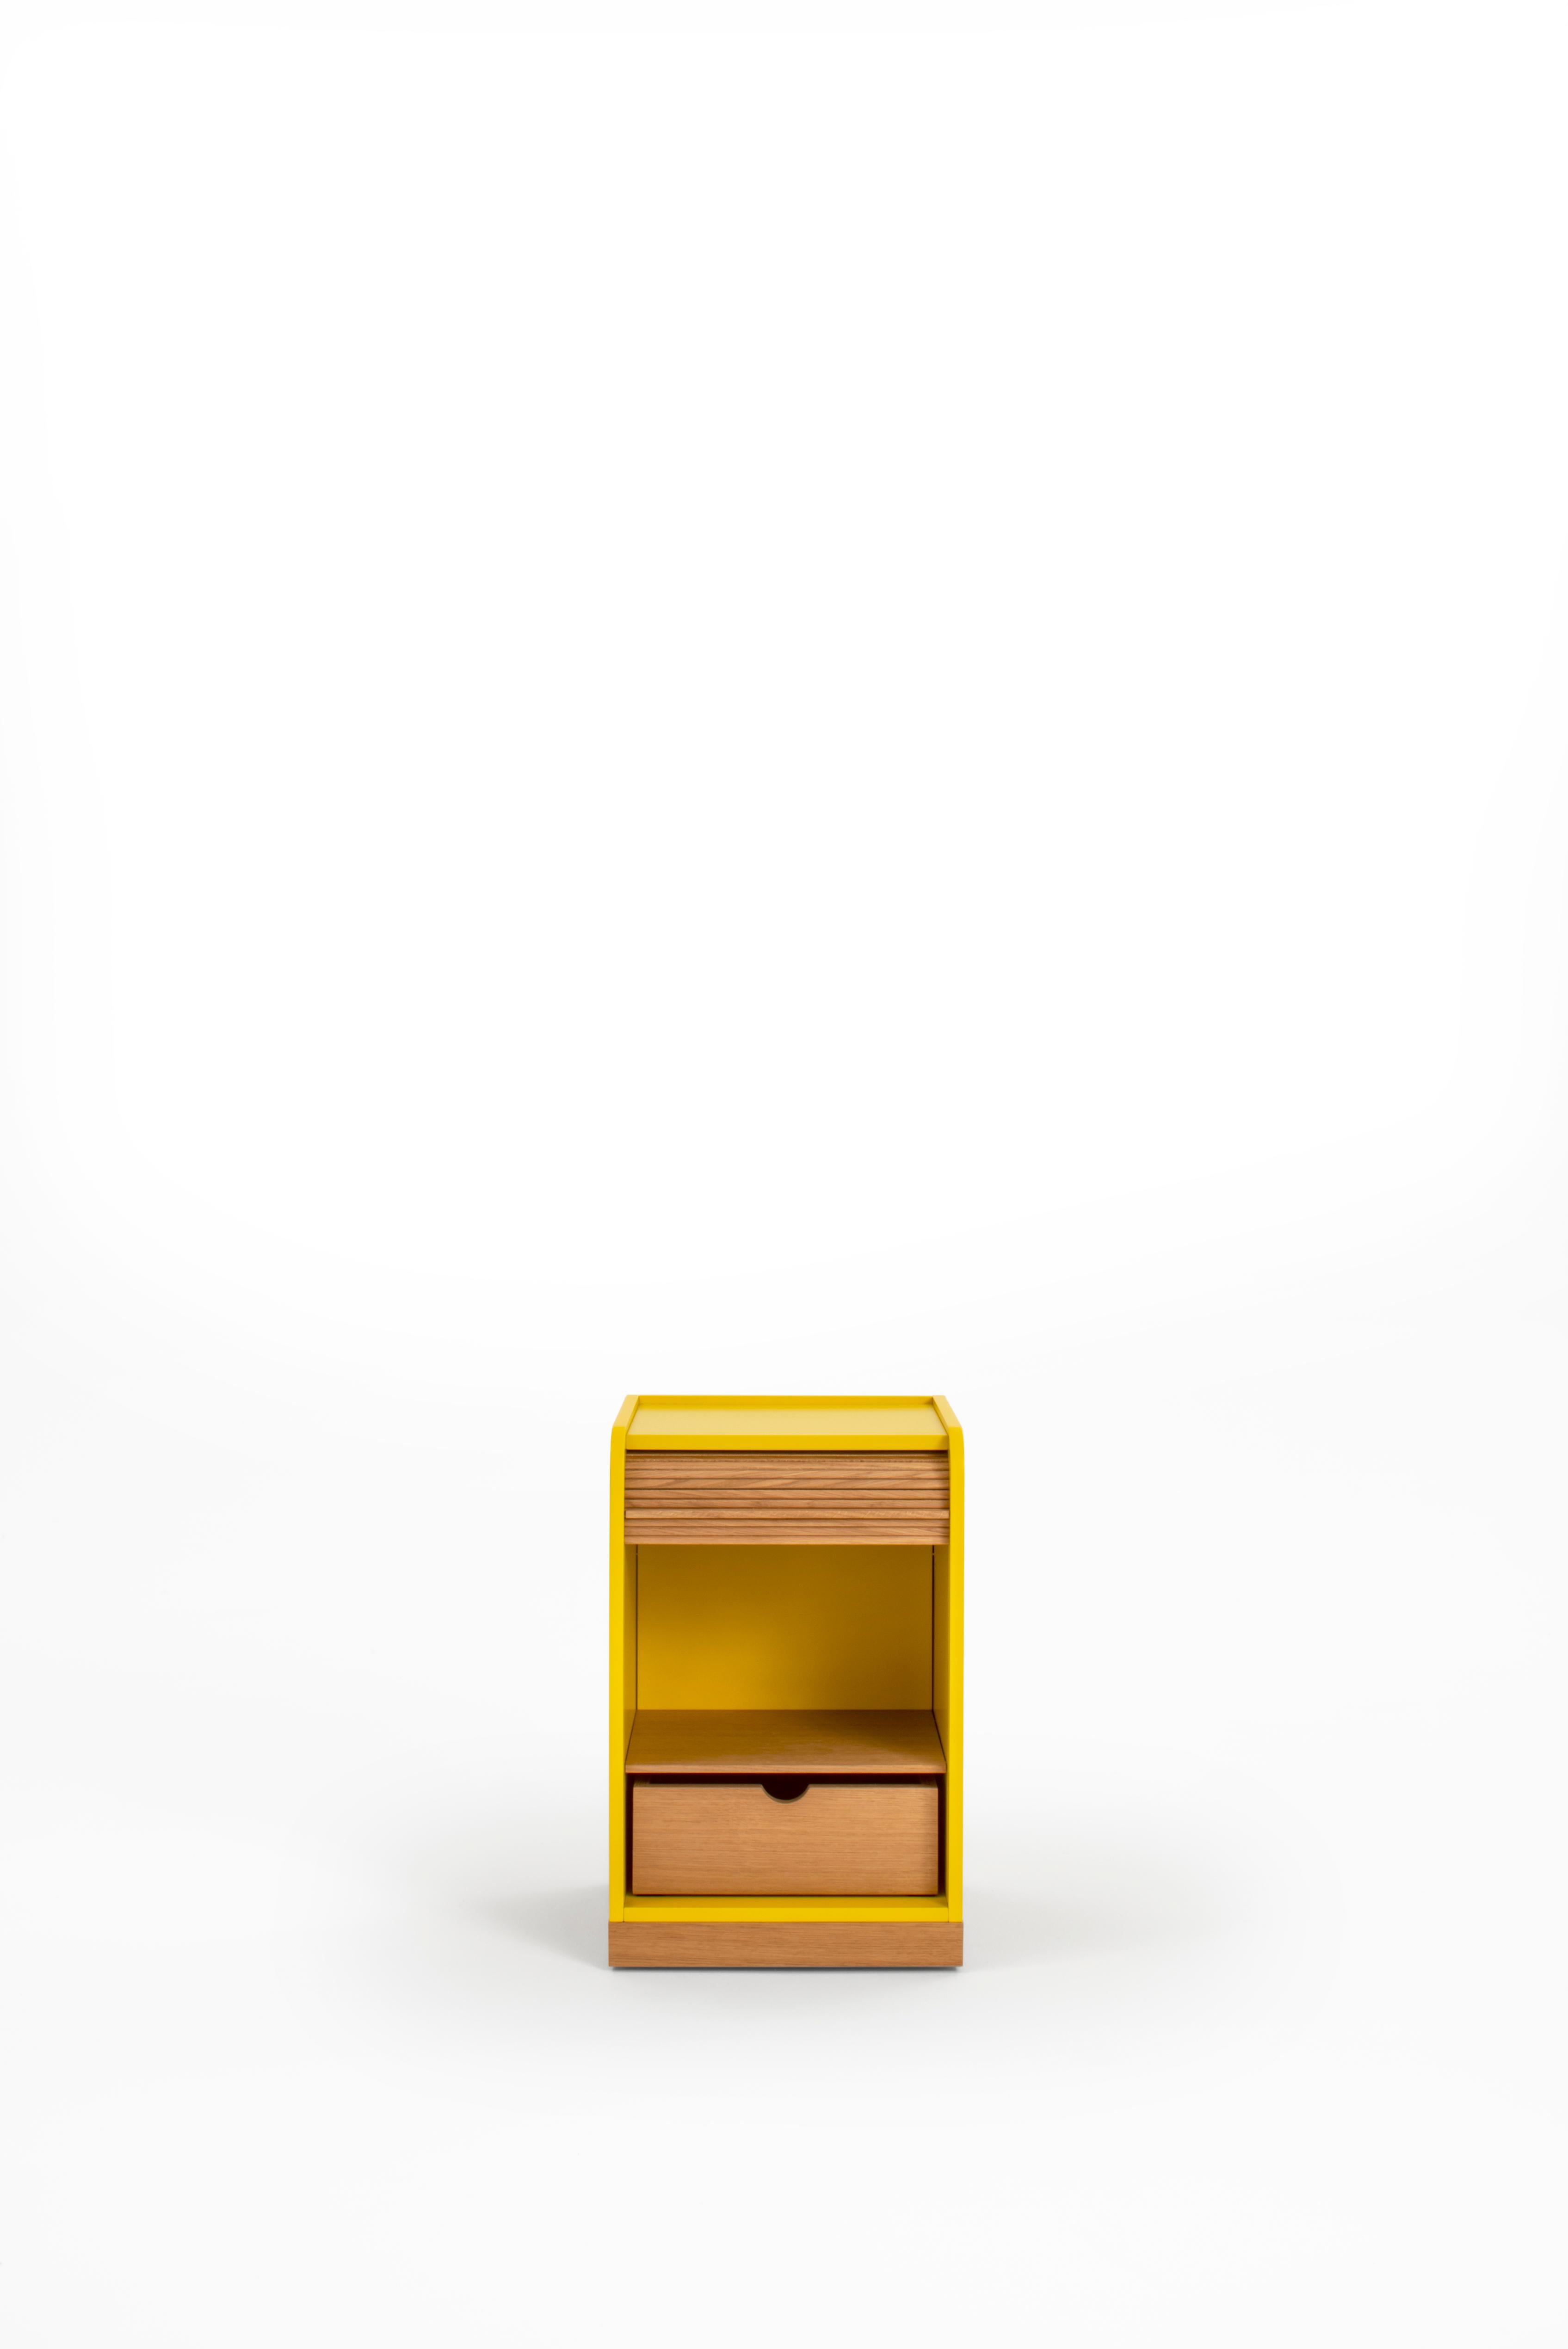 Glass Tapparelle Wheels Cabinet, Mustard Yellow by Colé Italia